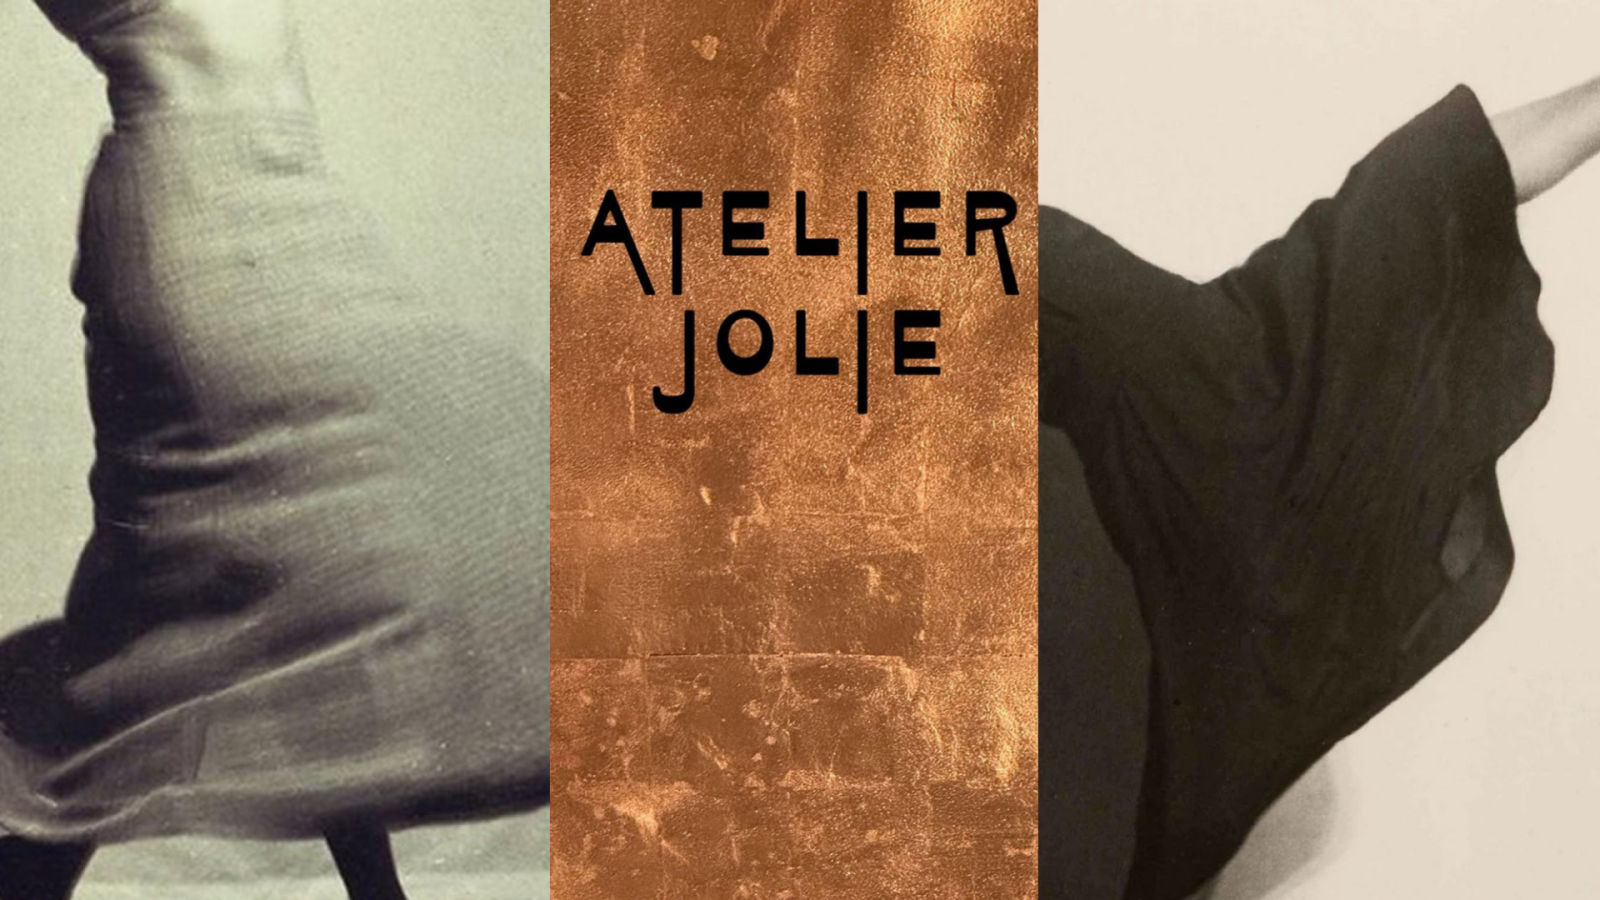 All about Angelina Jolie's fashion brand Atelier Jolie